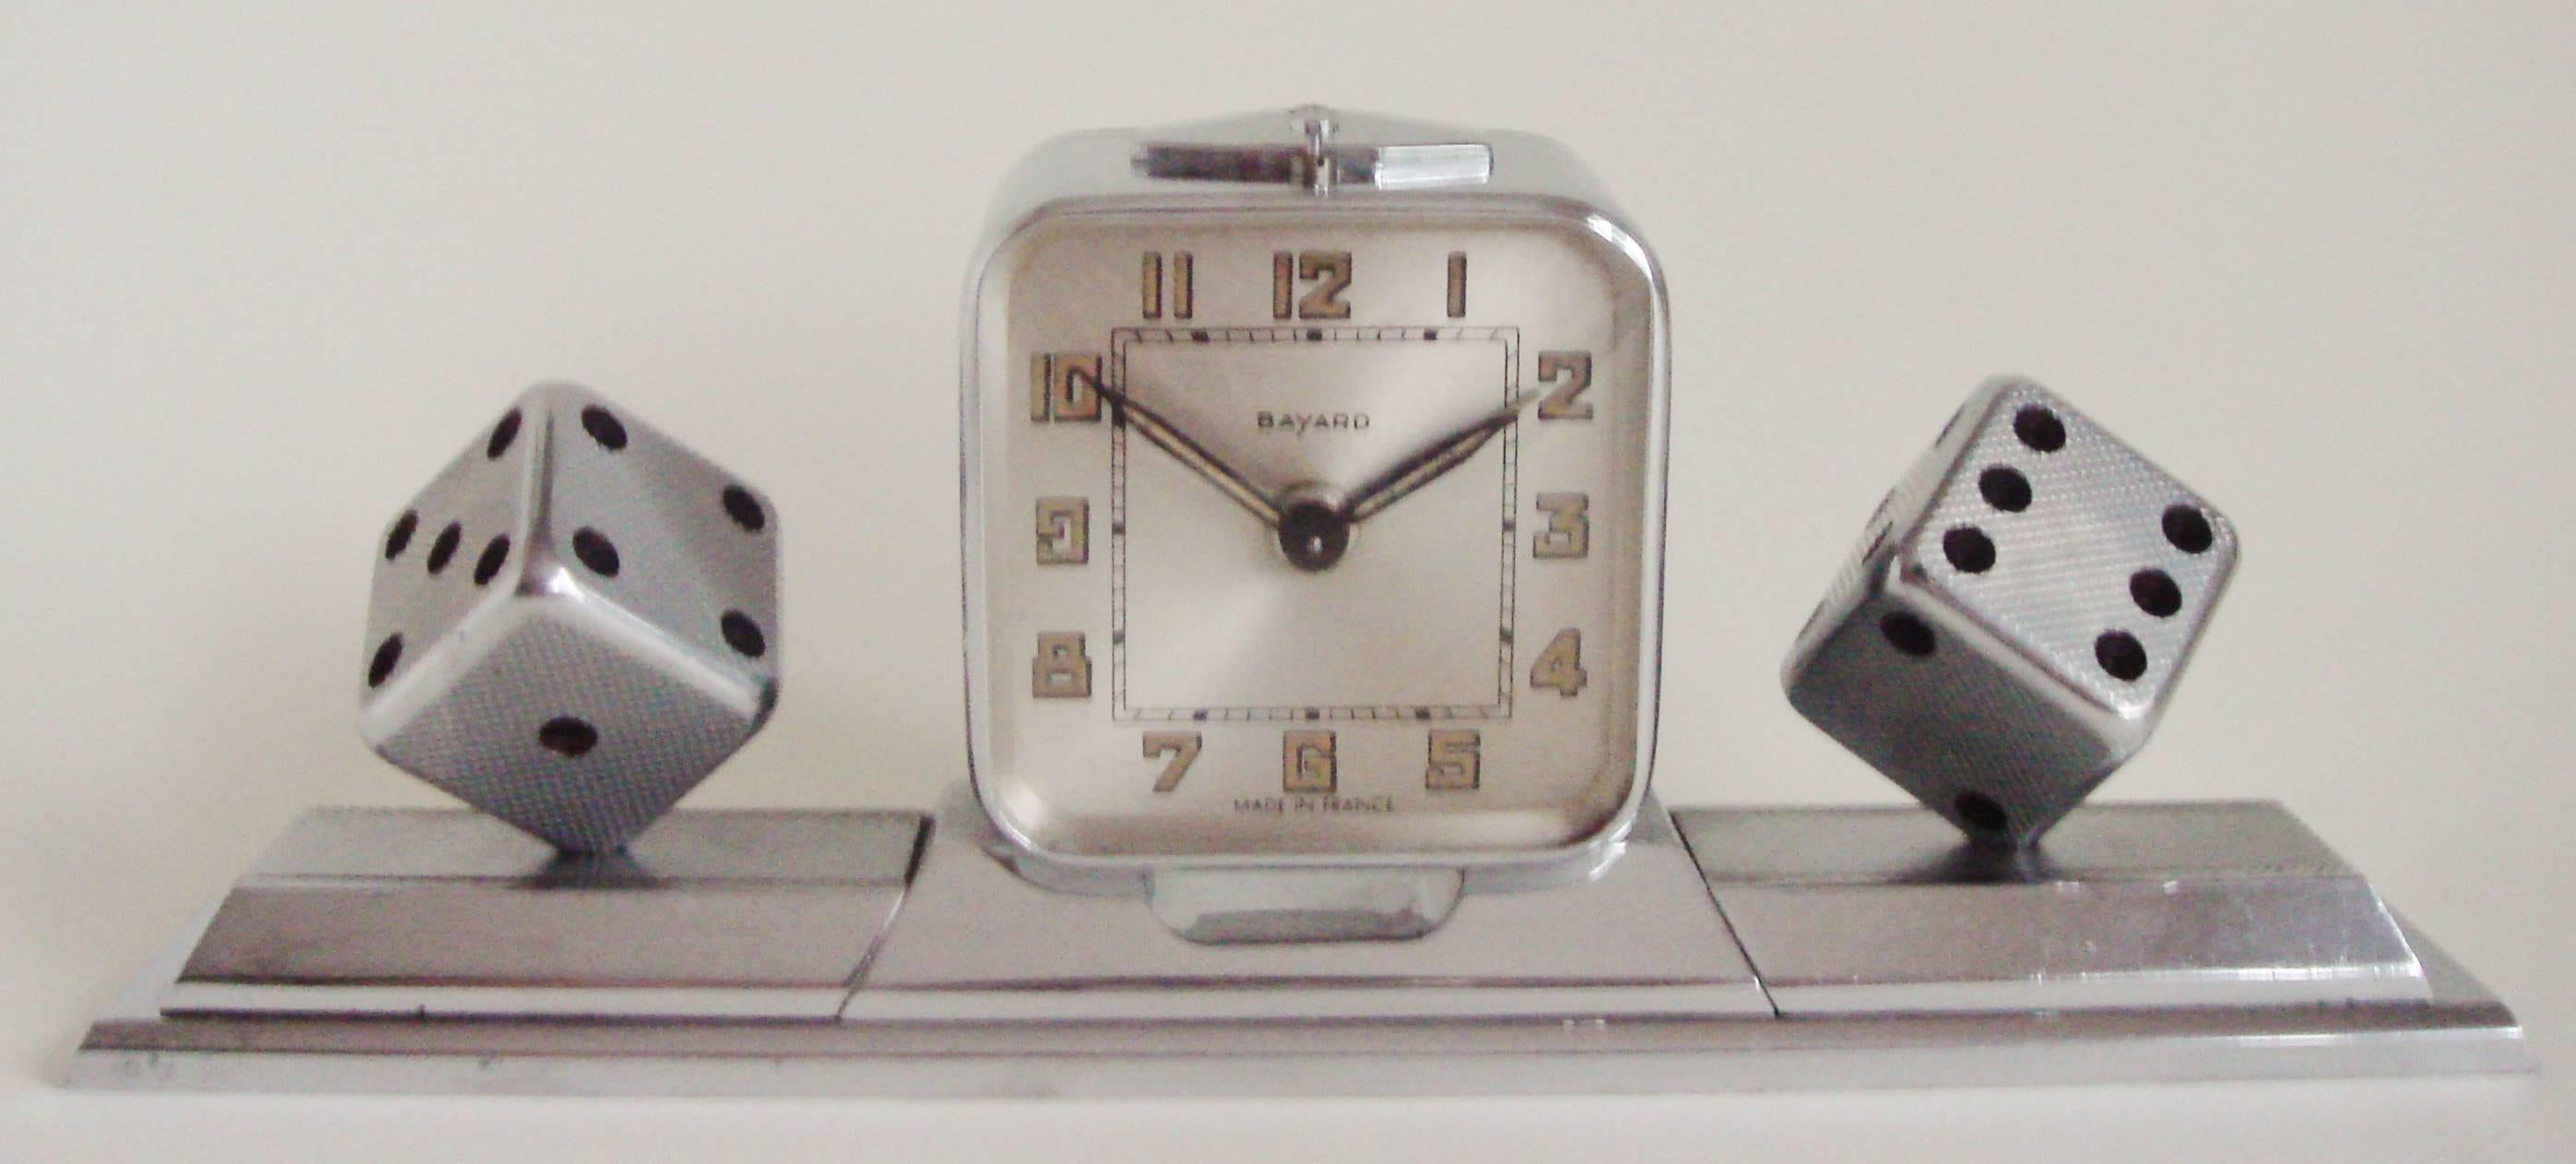 This beautifully engineered French Art Deco desk set features a chrome-plated brass Bayard mechanical alarm clock mounted on a heavy chrome plated bronze base. This clock is flanked on either side by a detachable plated bronze paperweight each with